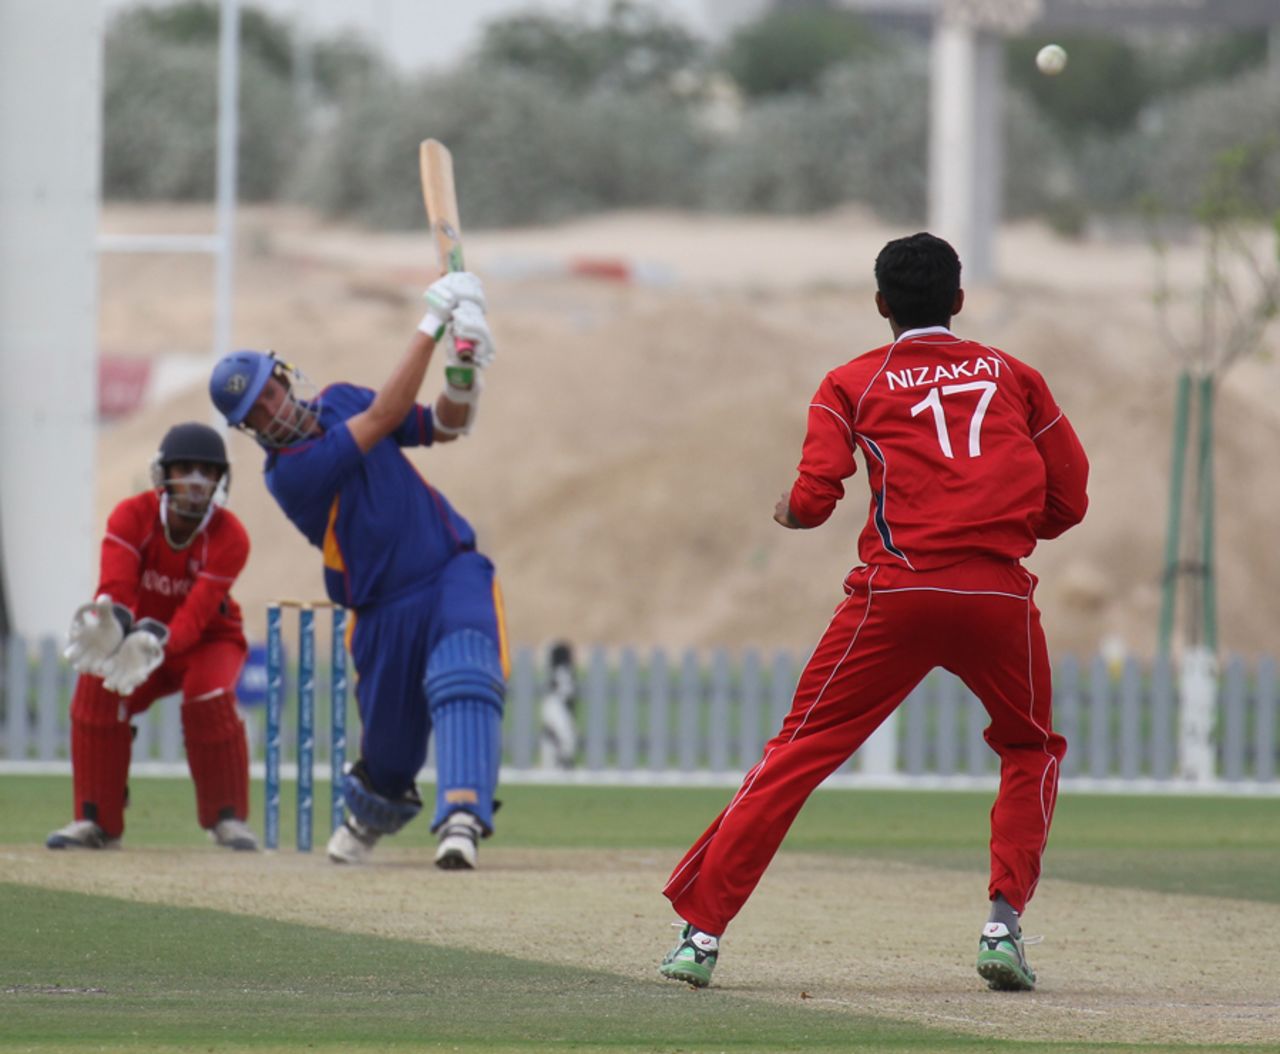 Gerrie Snyman slams a six off Nizakat Khan in his innings of 59 against Hong Kong at the ICC WCL2 in Dubai on 14th April 2011